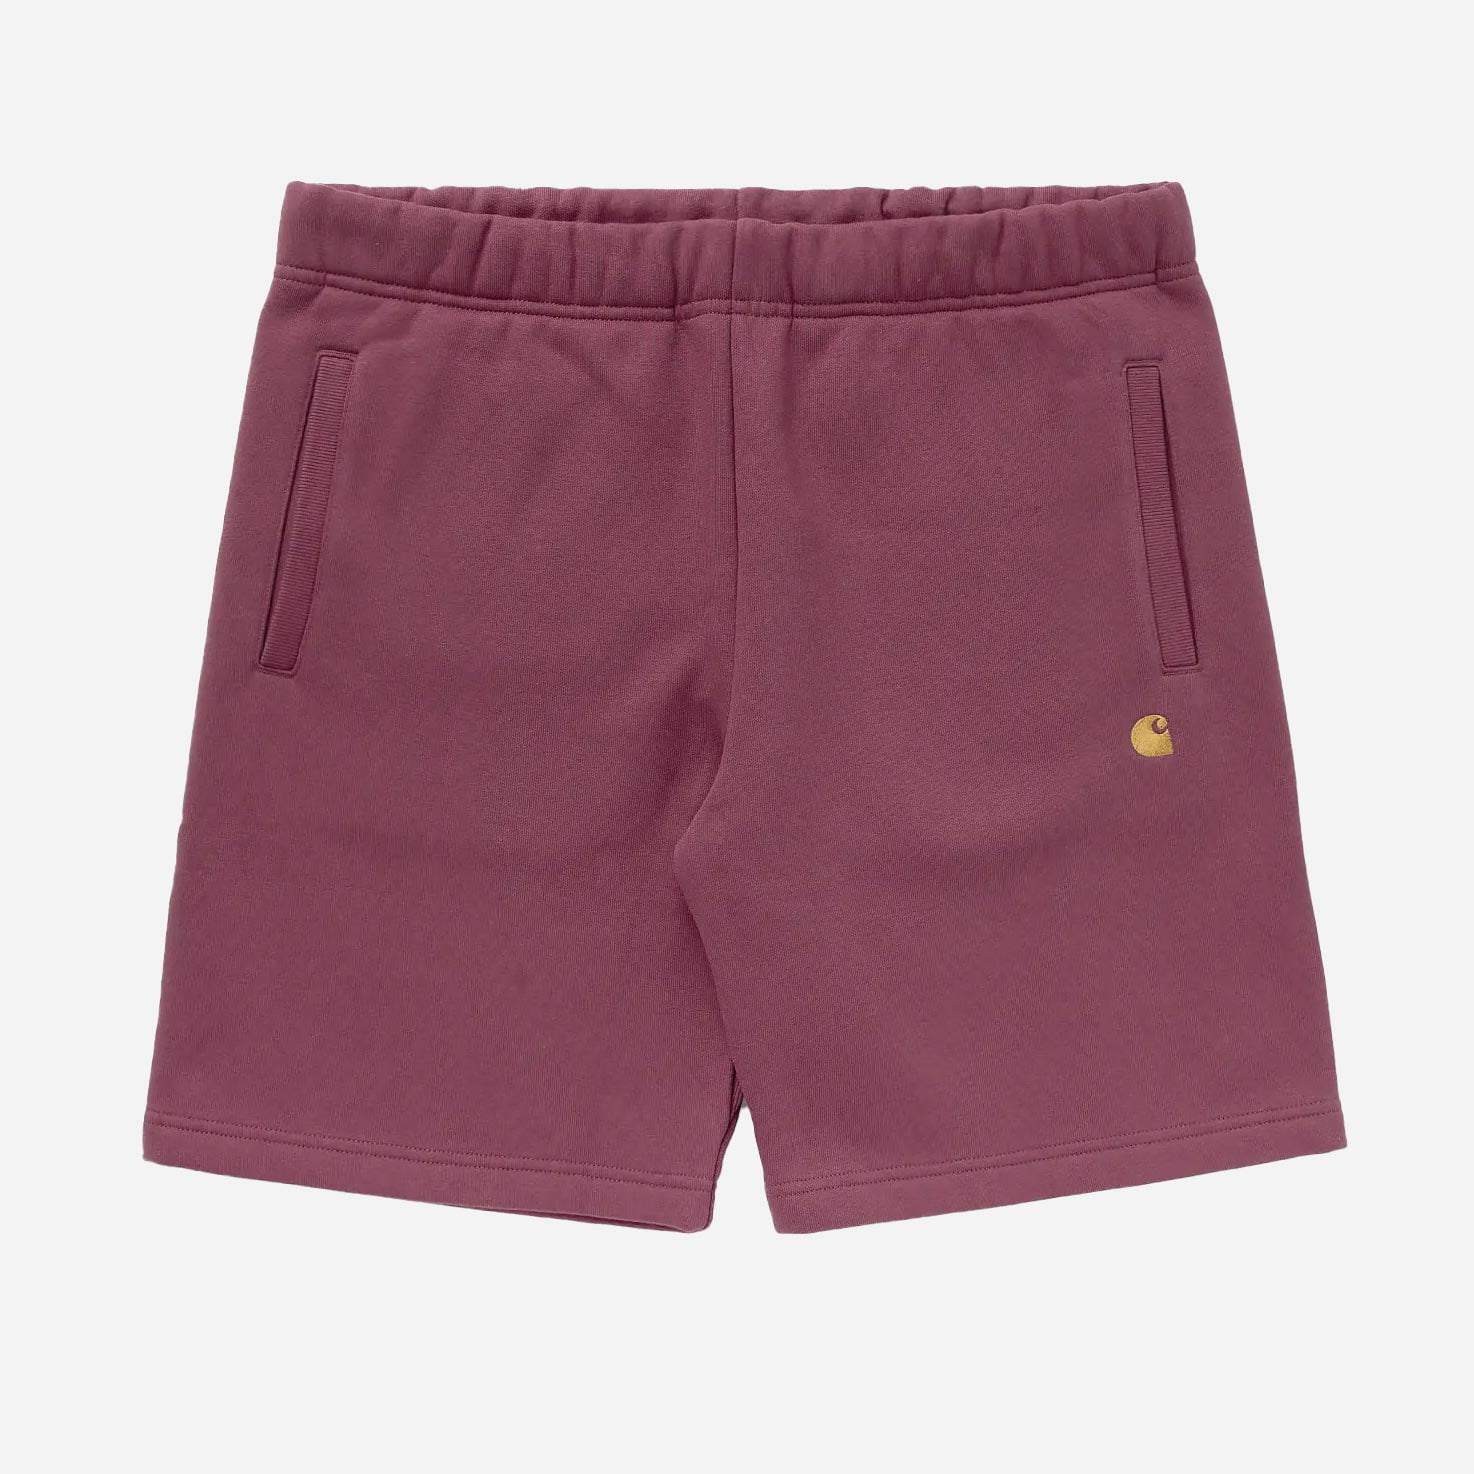 Carhartt WIP Chase Short - Punch/Gold